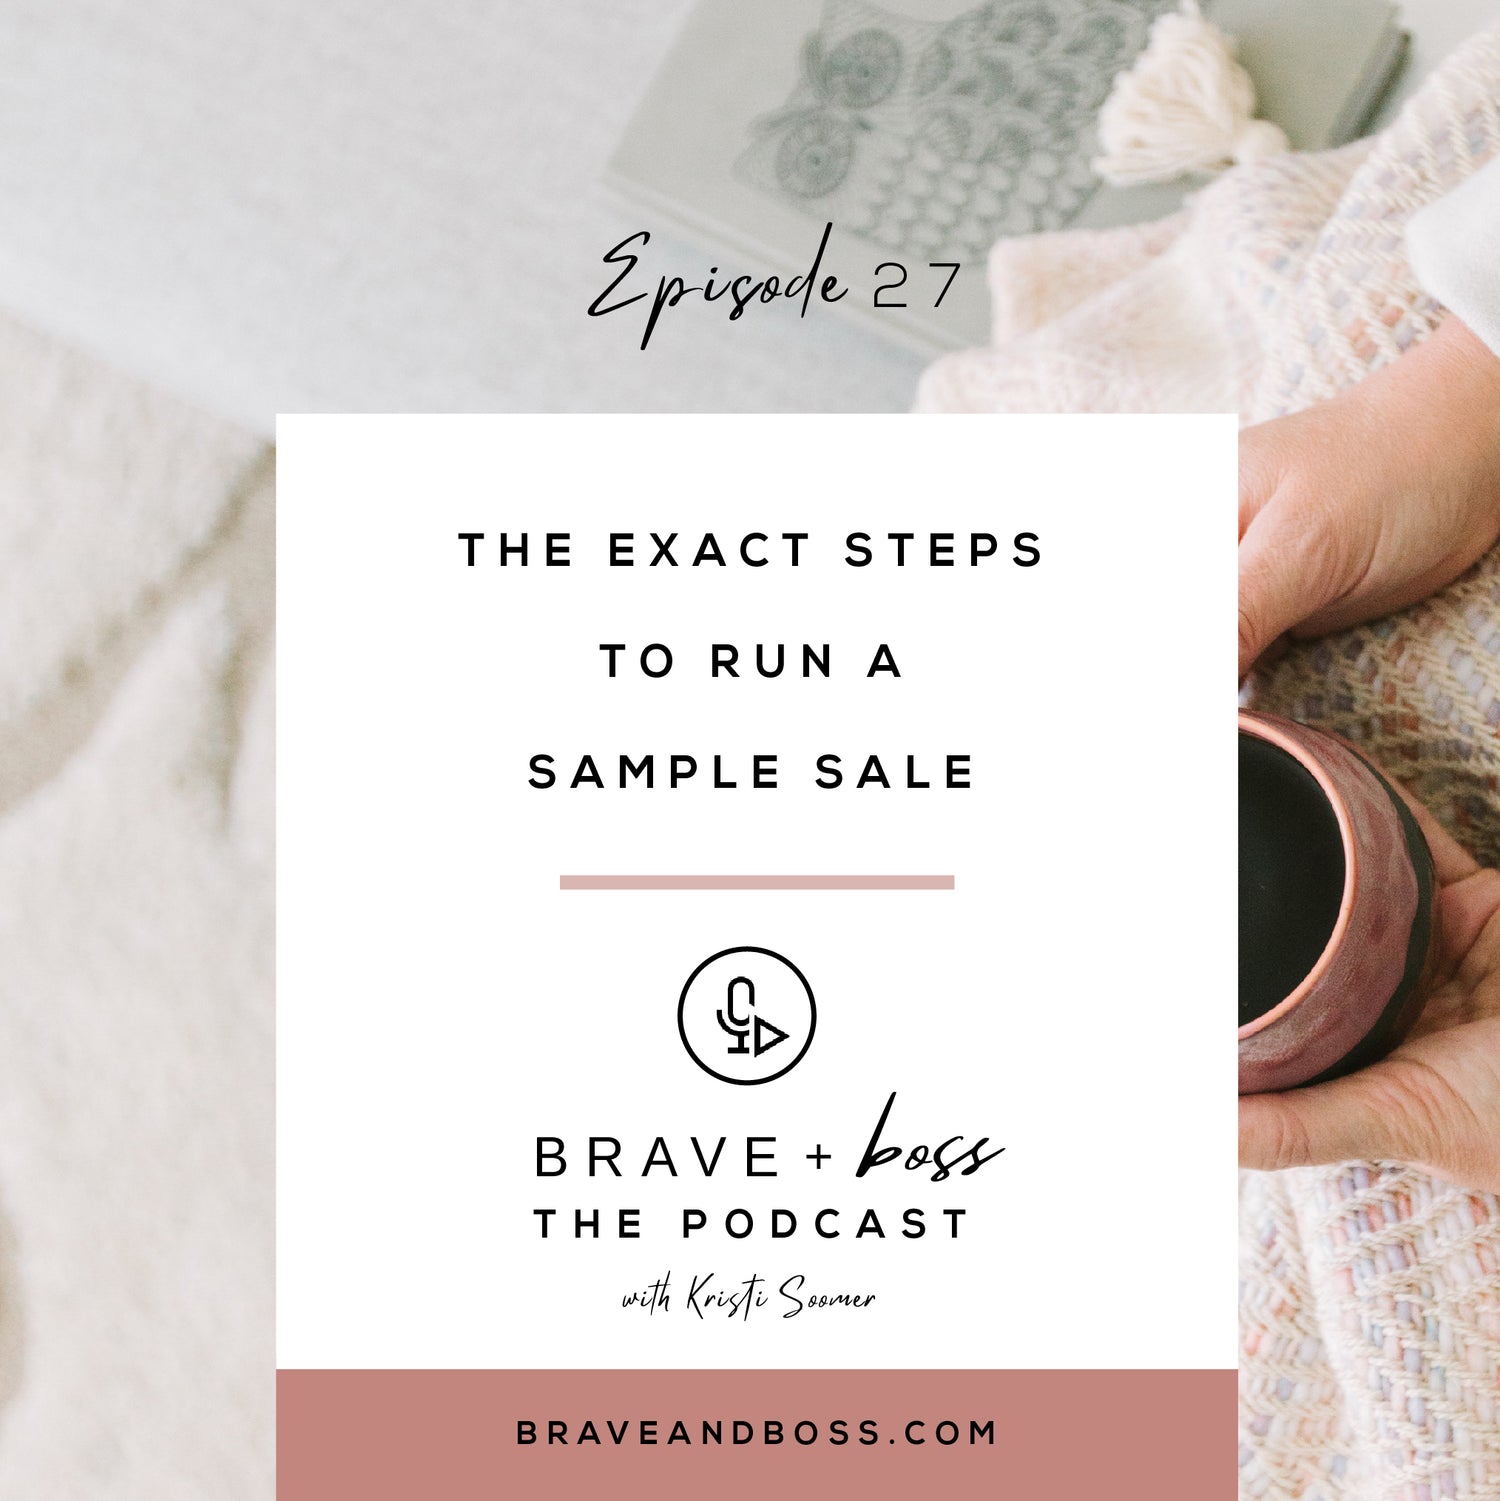 The Exact Steps to Run a Sample Sale